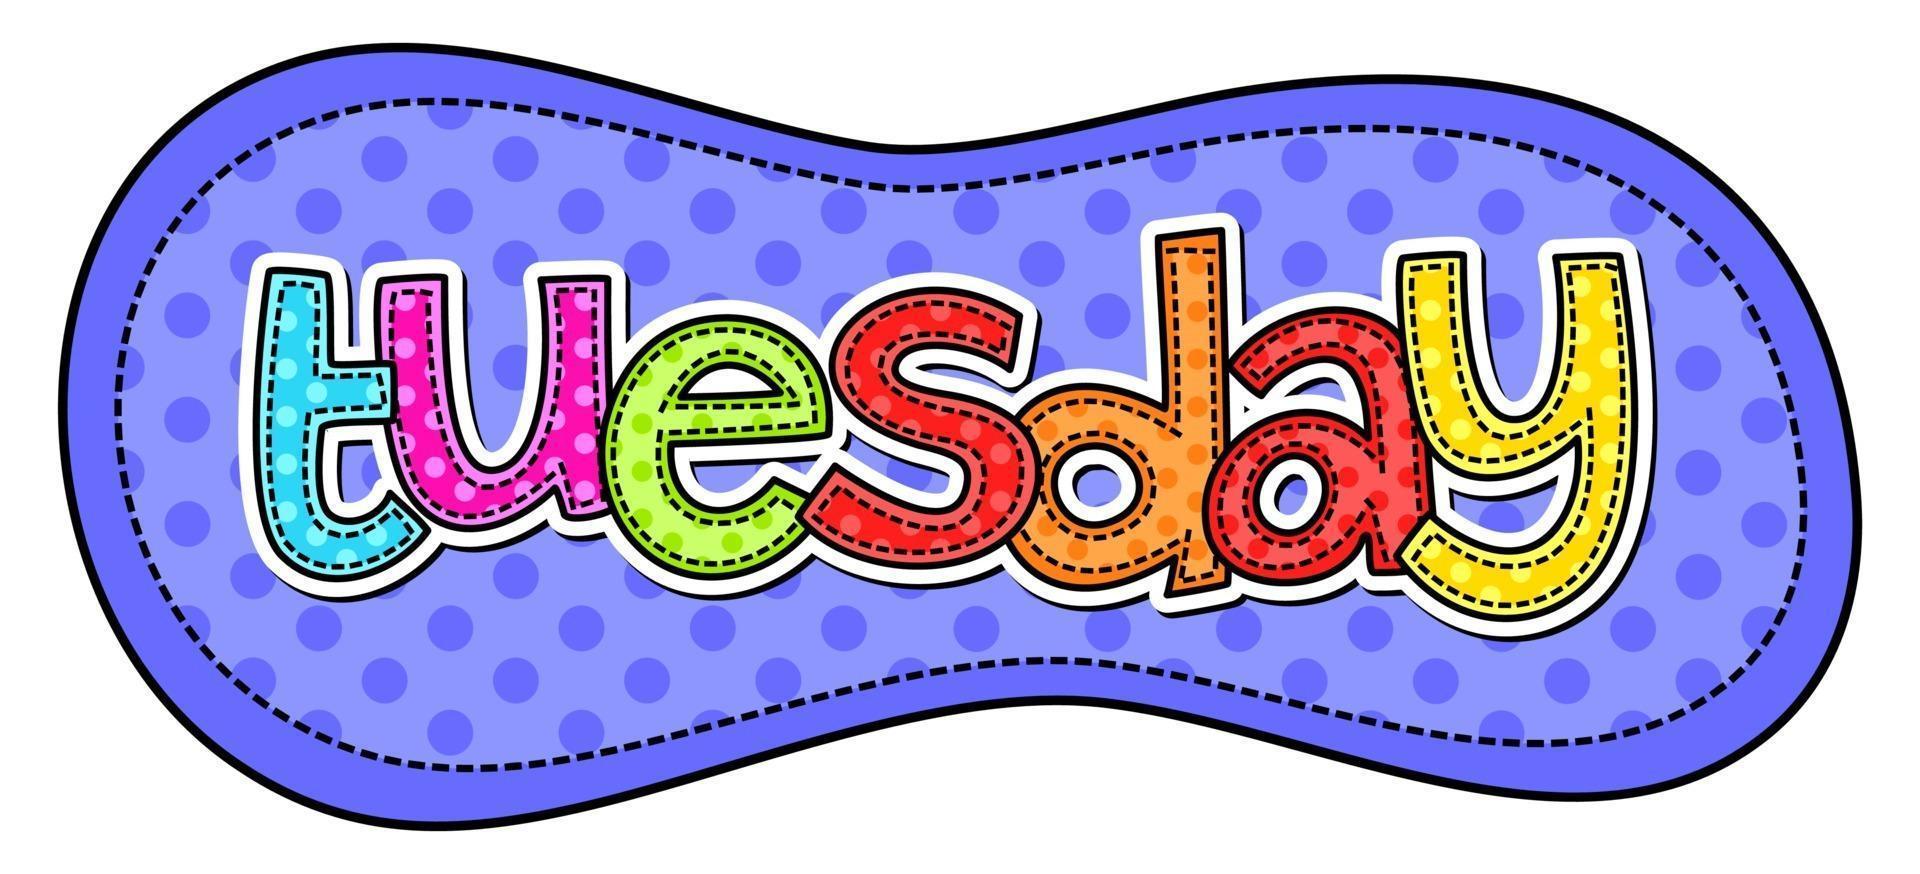 Tuesday Week Day Doodle Stitch Text Lettering Patch vector